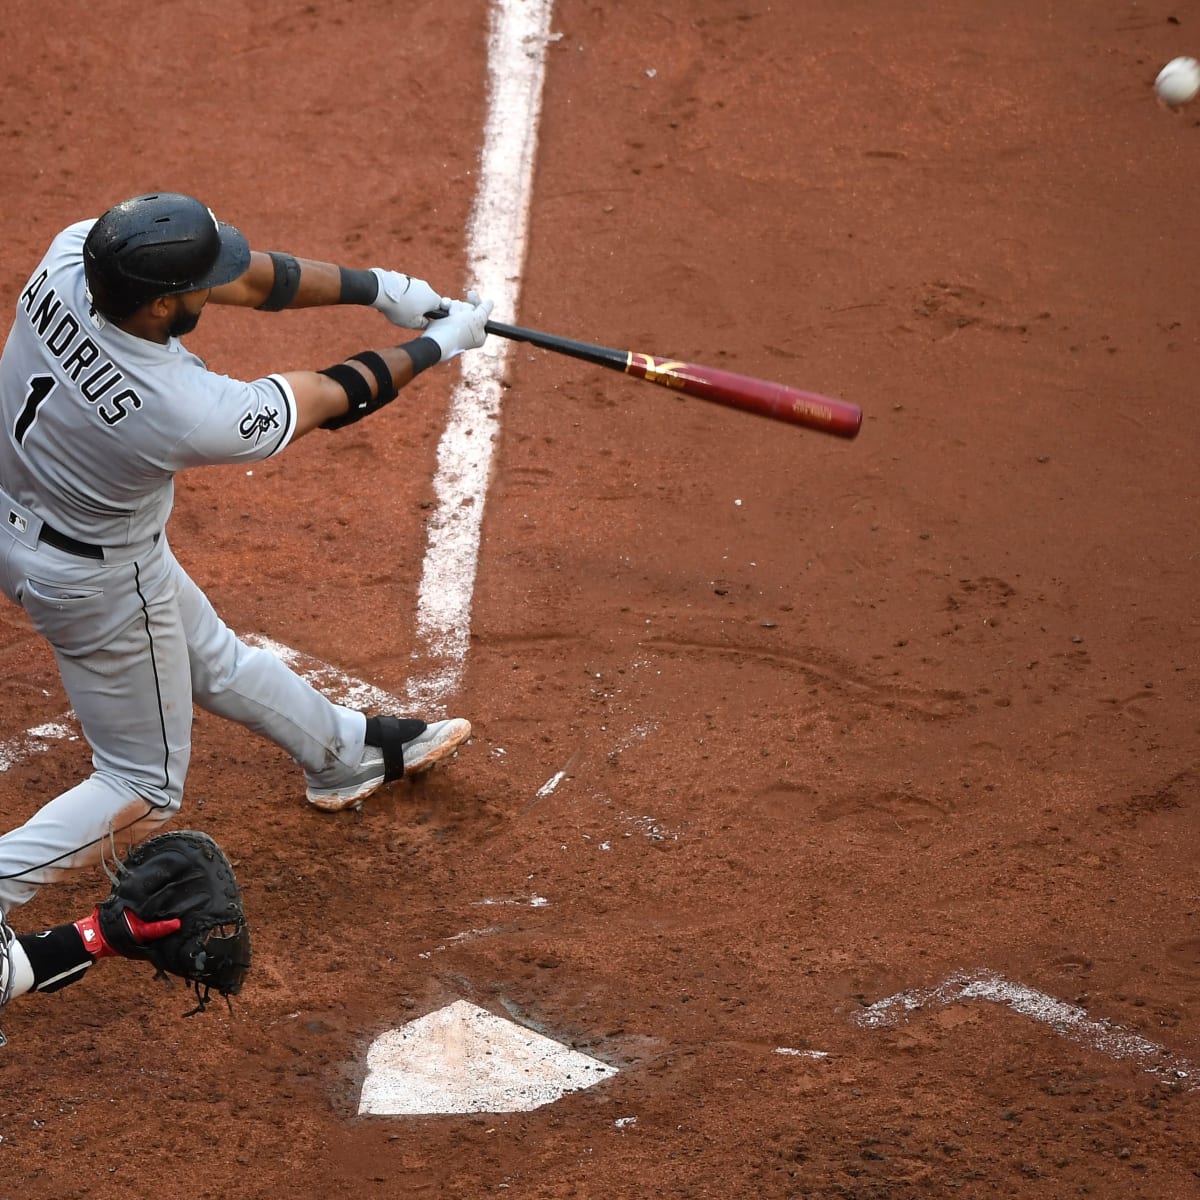 White Sox beat Red Sox 3-2 in rain-shortened game